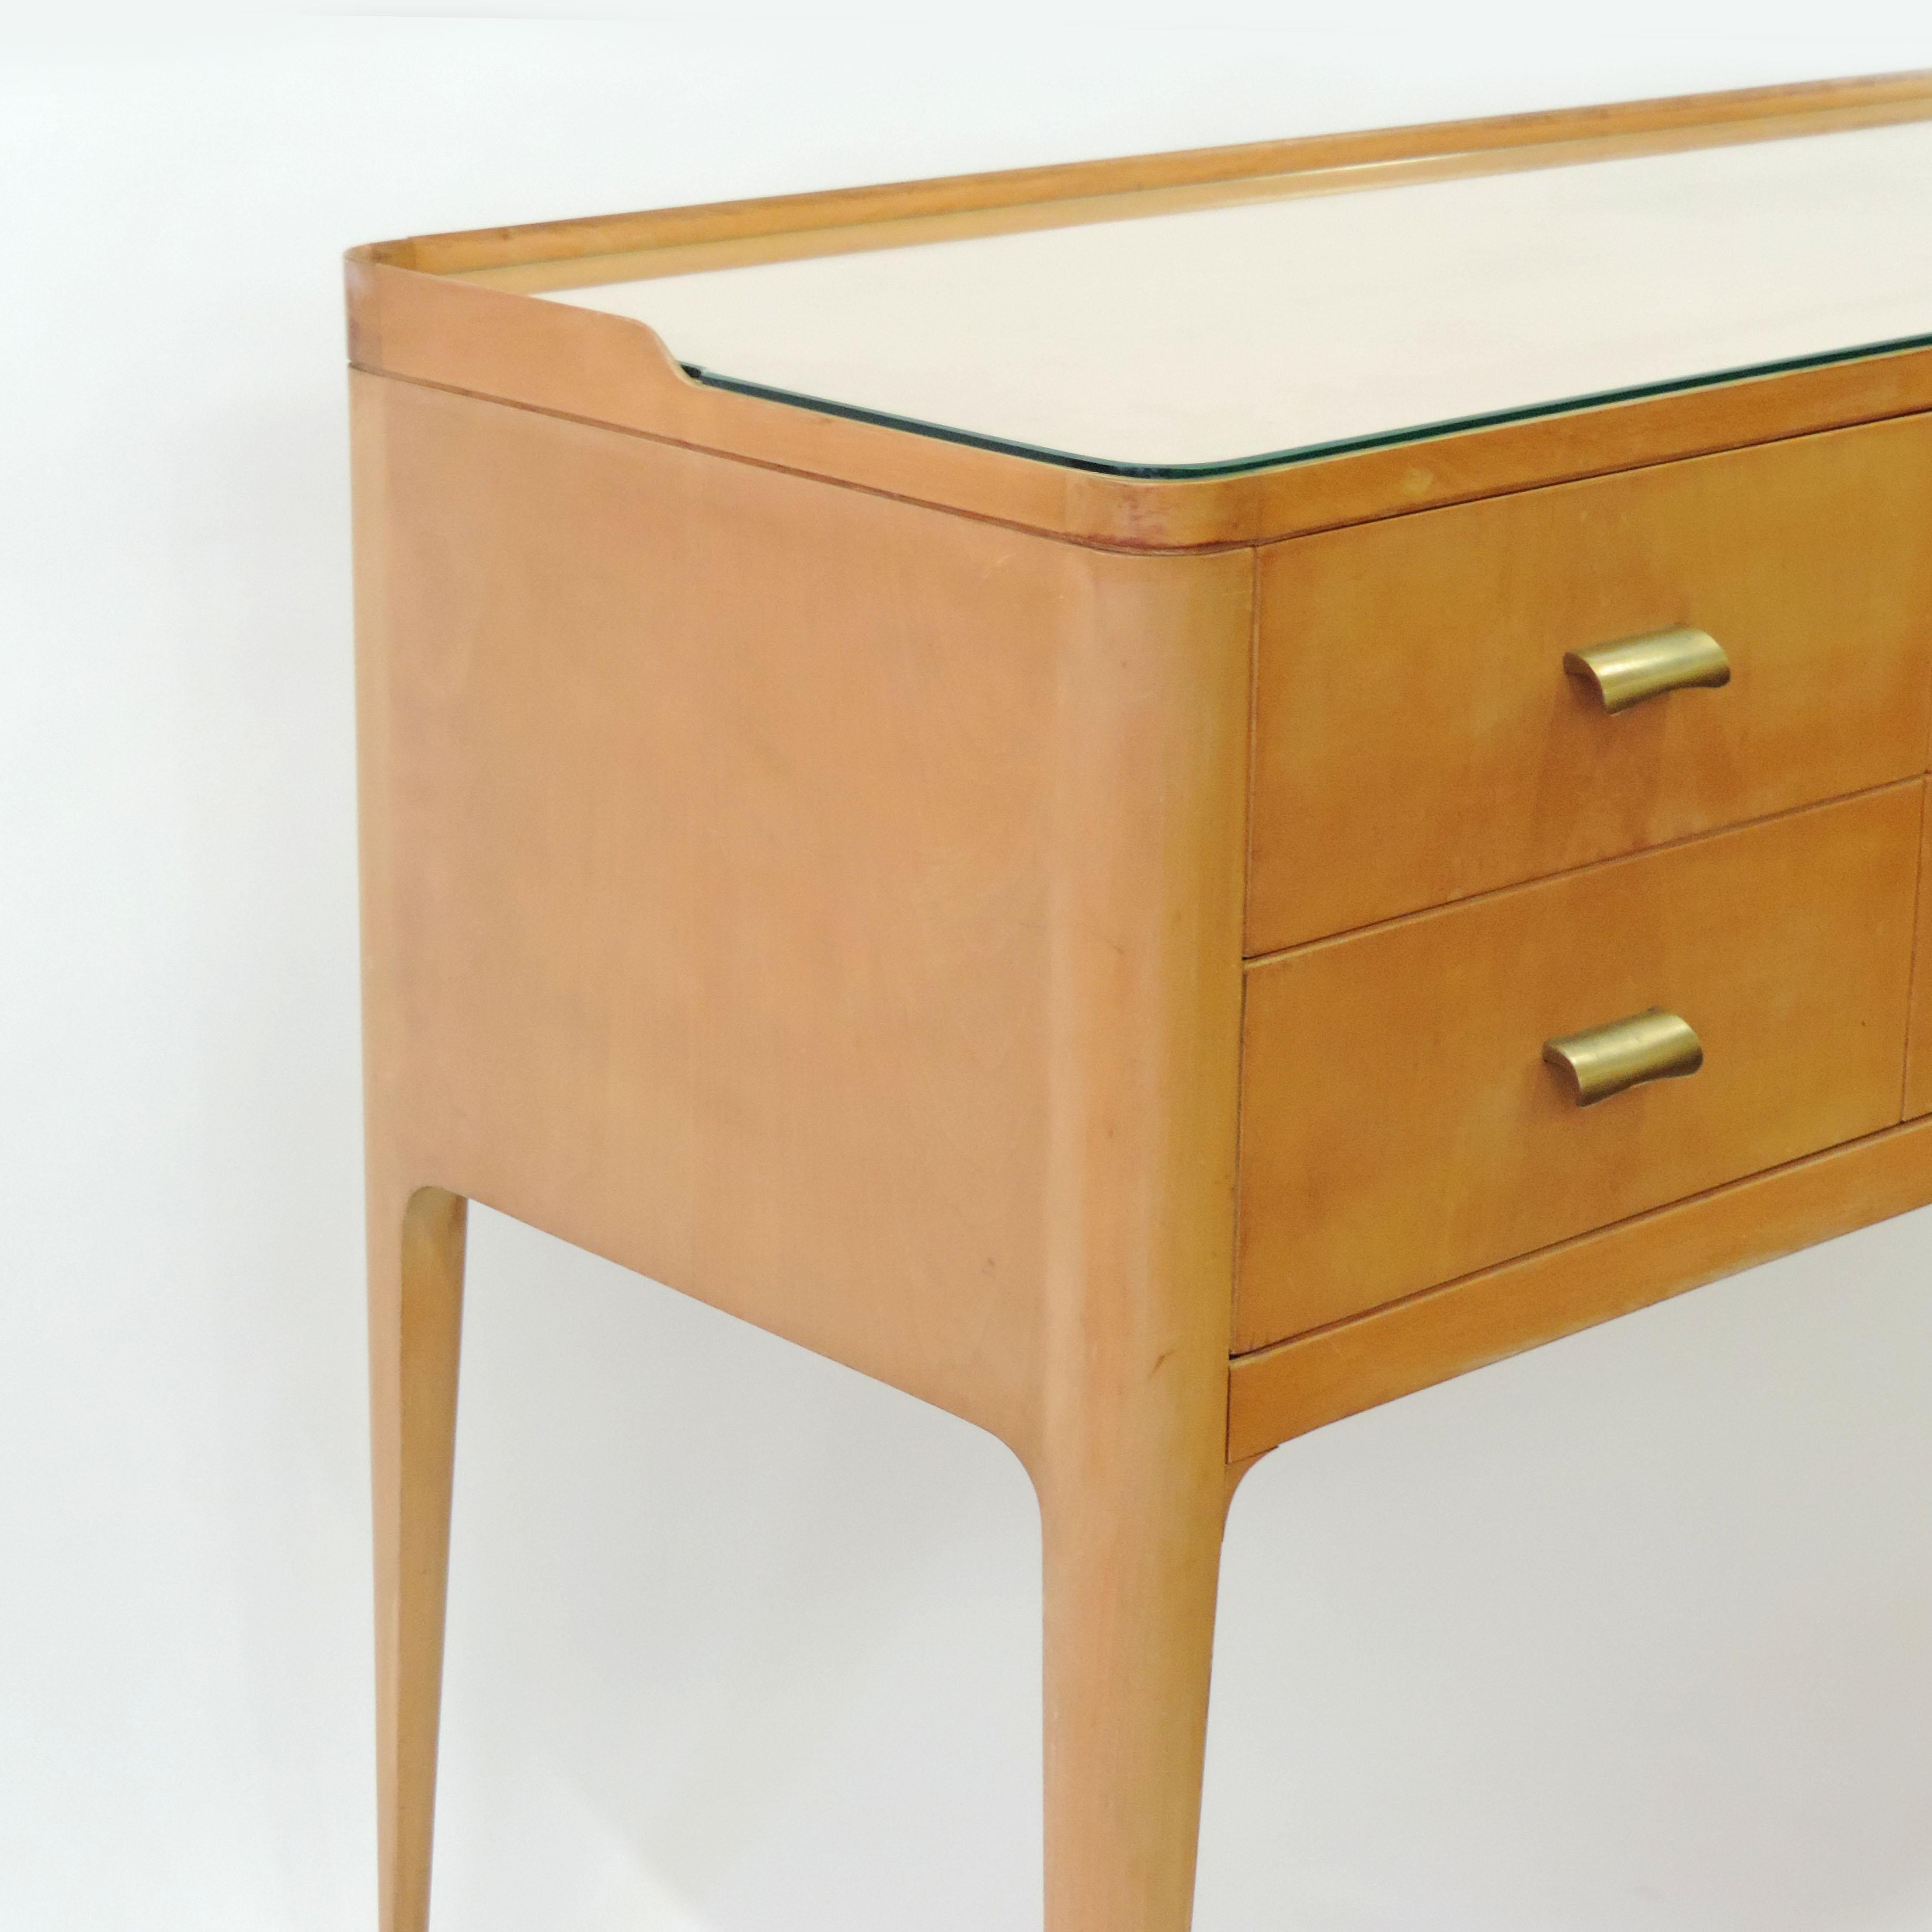 Italian 1950s curved wooden sideboard with brass handles and feet and a glass top.
4 drawers.